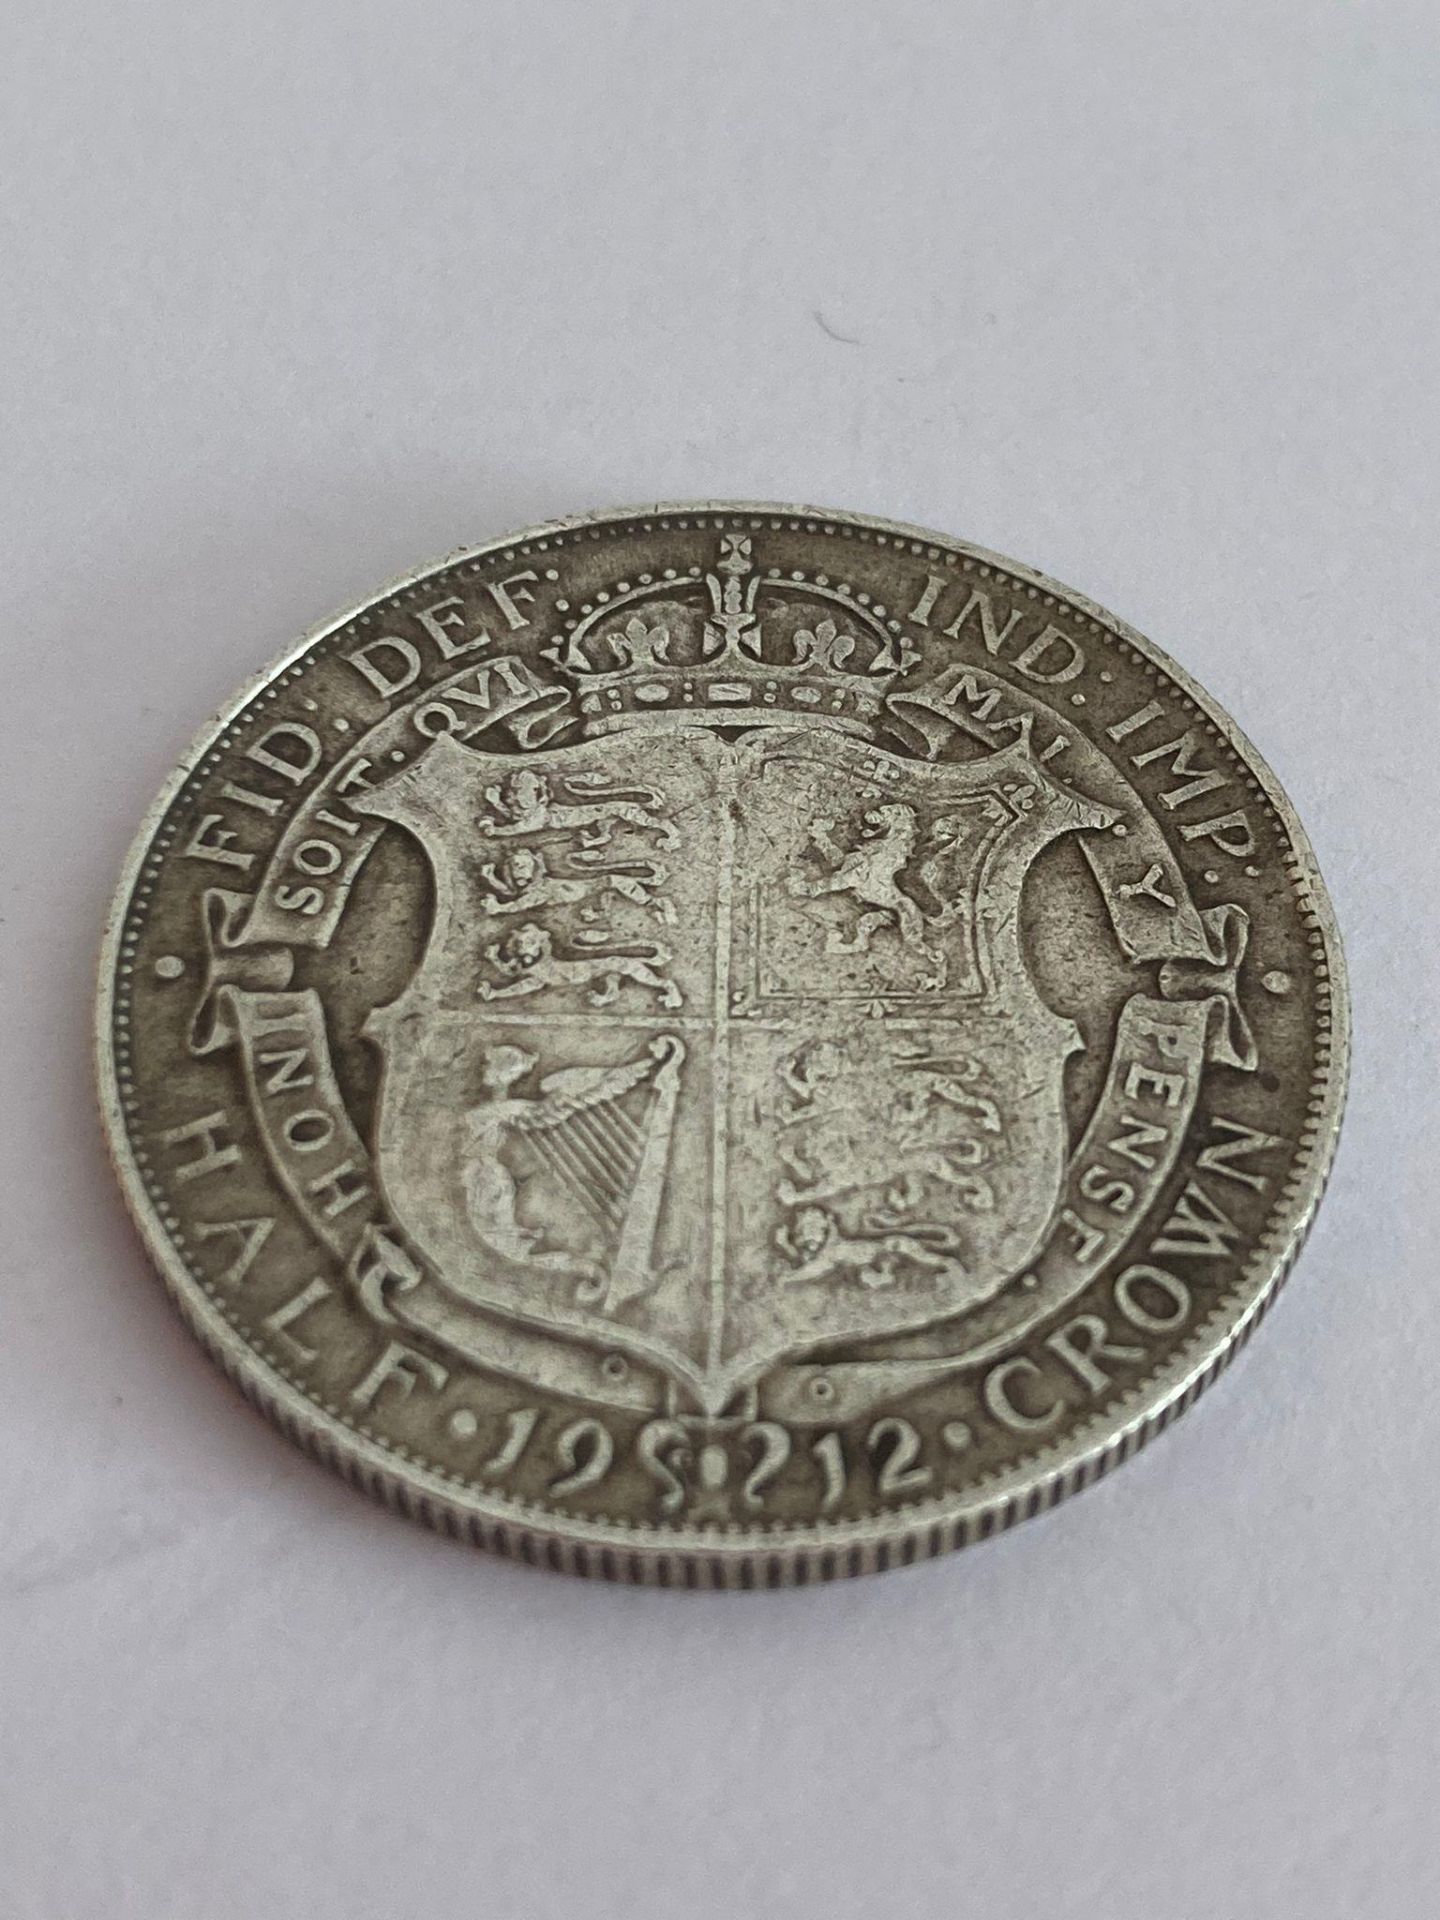 SILVER HALF CROWN 1912 in Extra fine condition, Having clear detail and words to both sides with